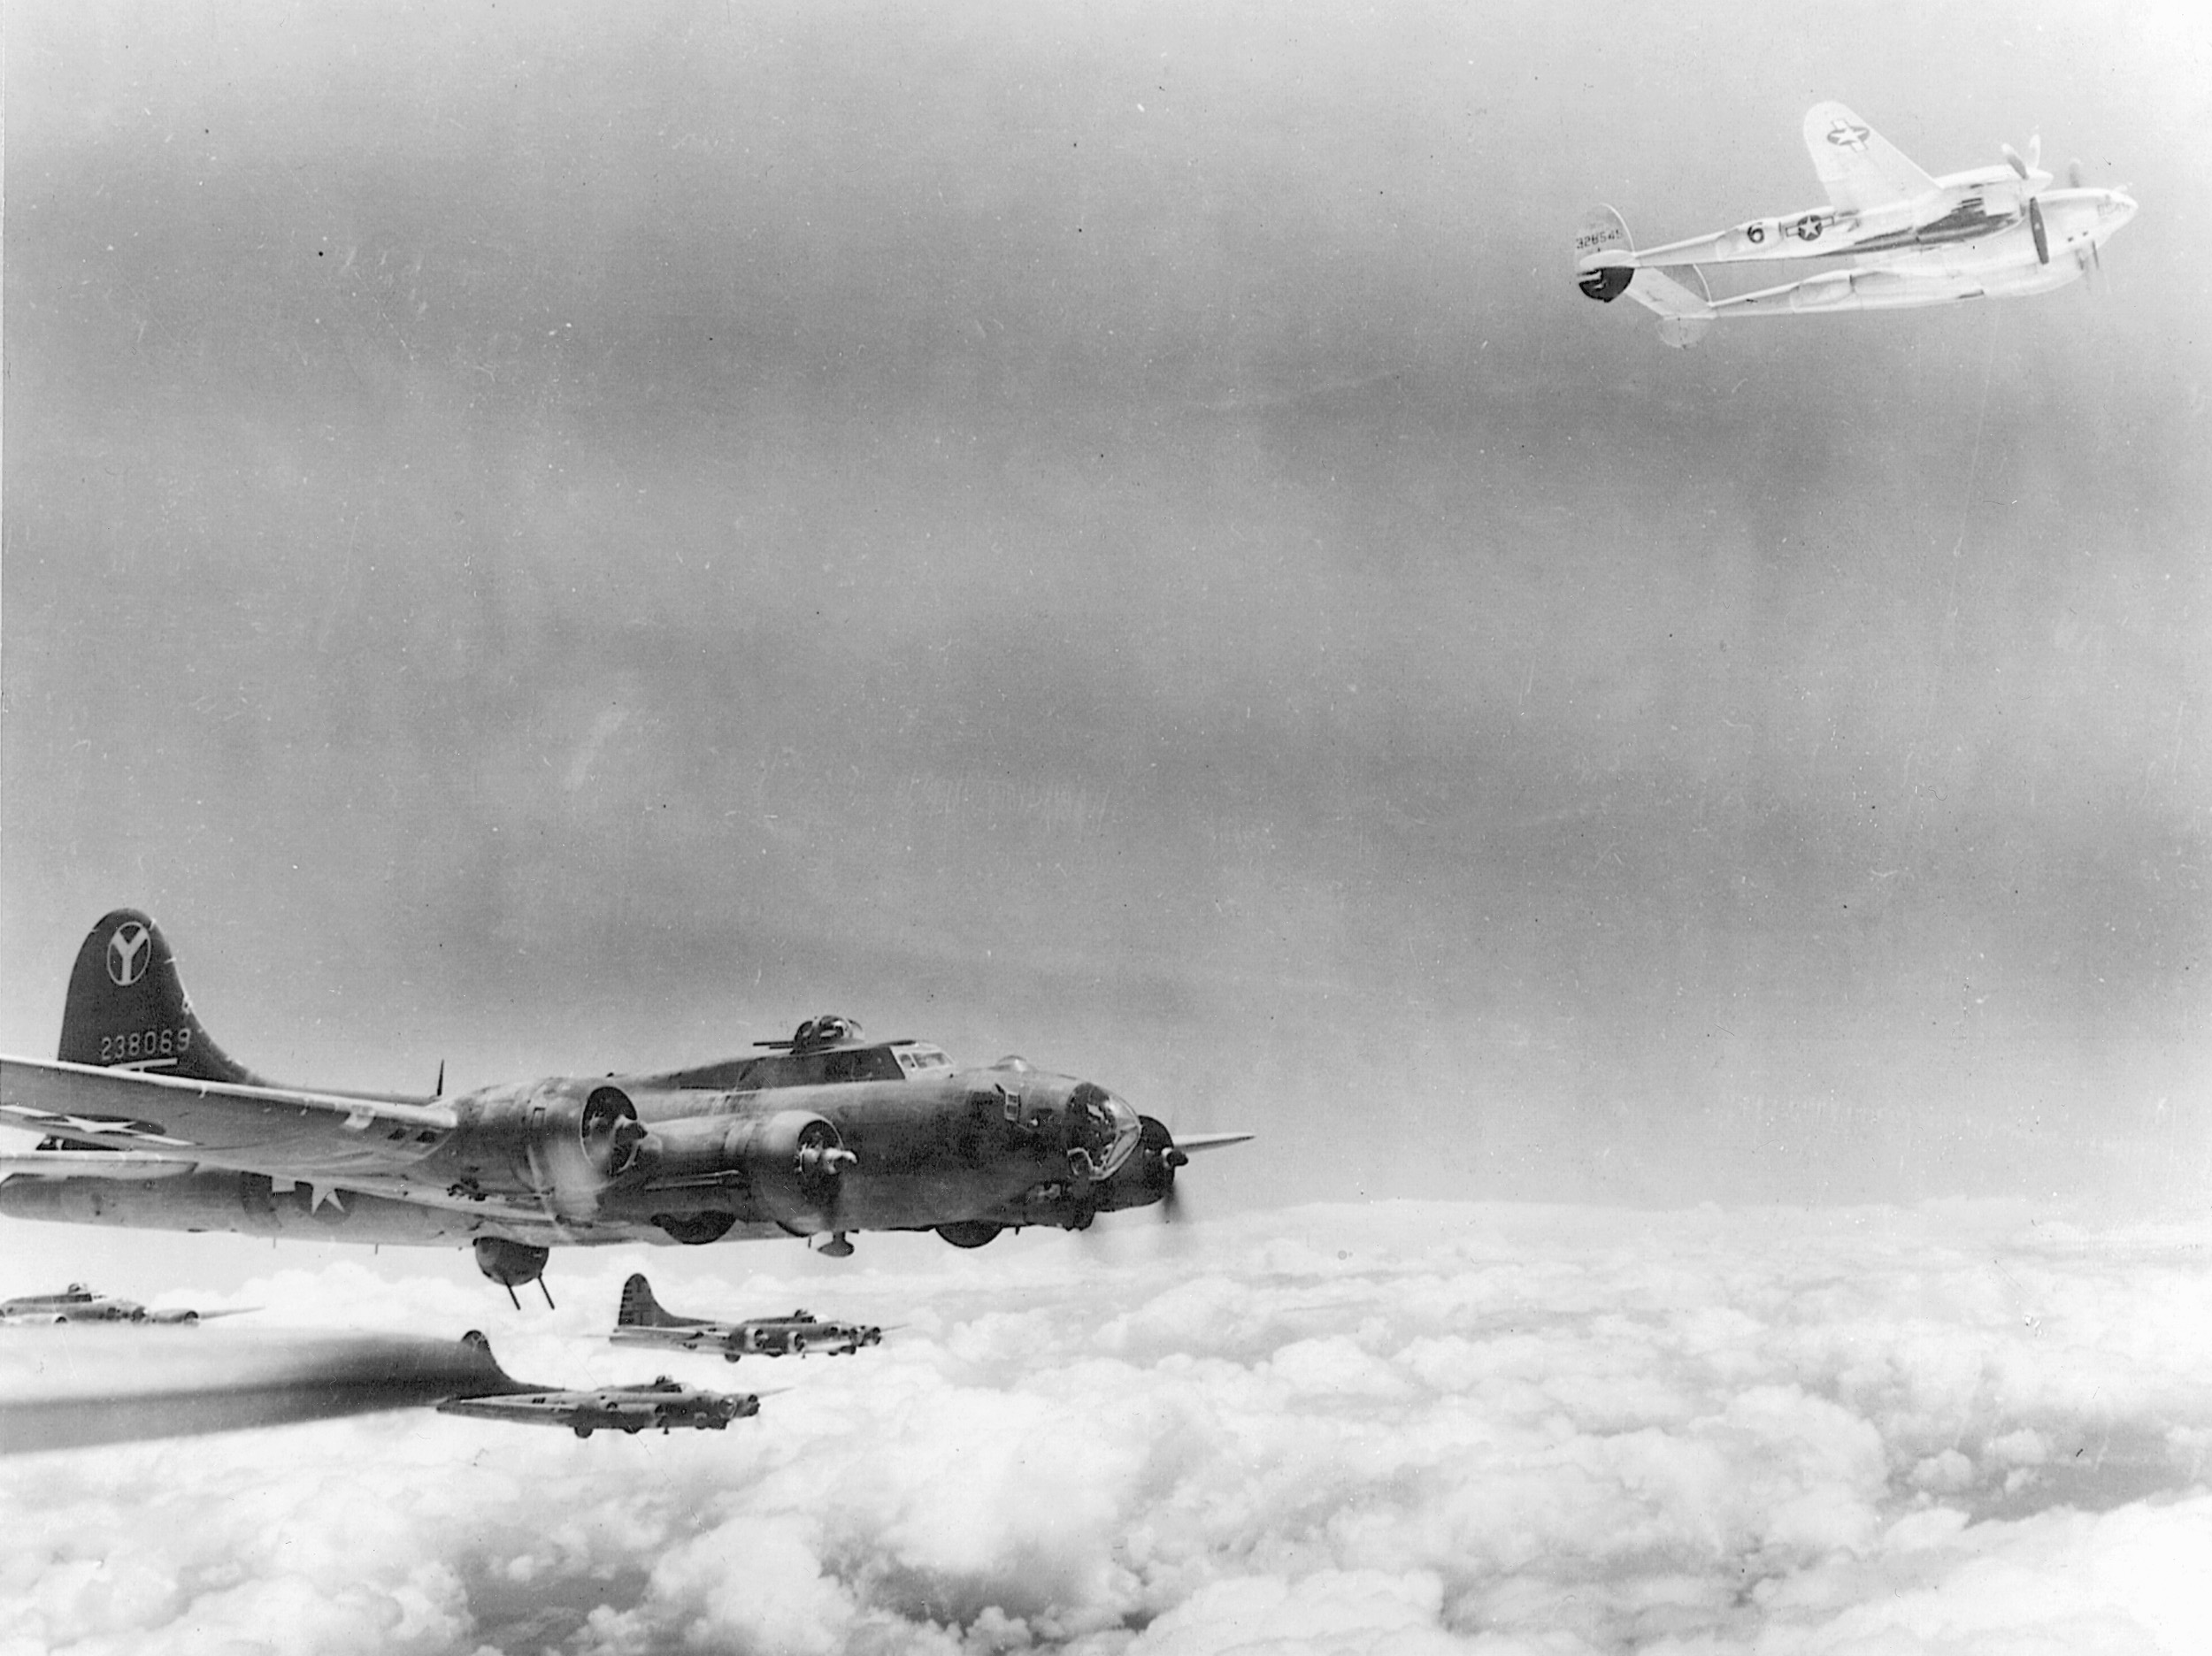 A P-38 escorts B-17 Flying Fortresses, July 1944. One of its propellers is feathered.